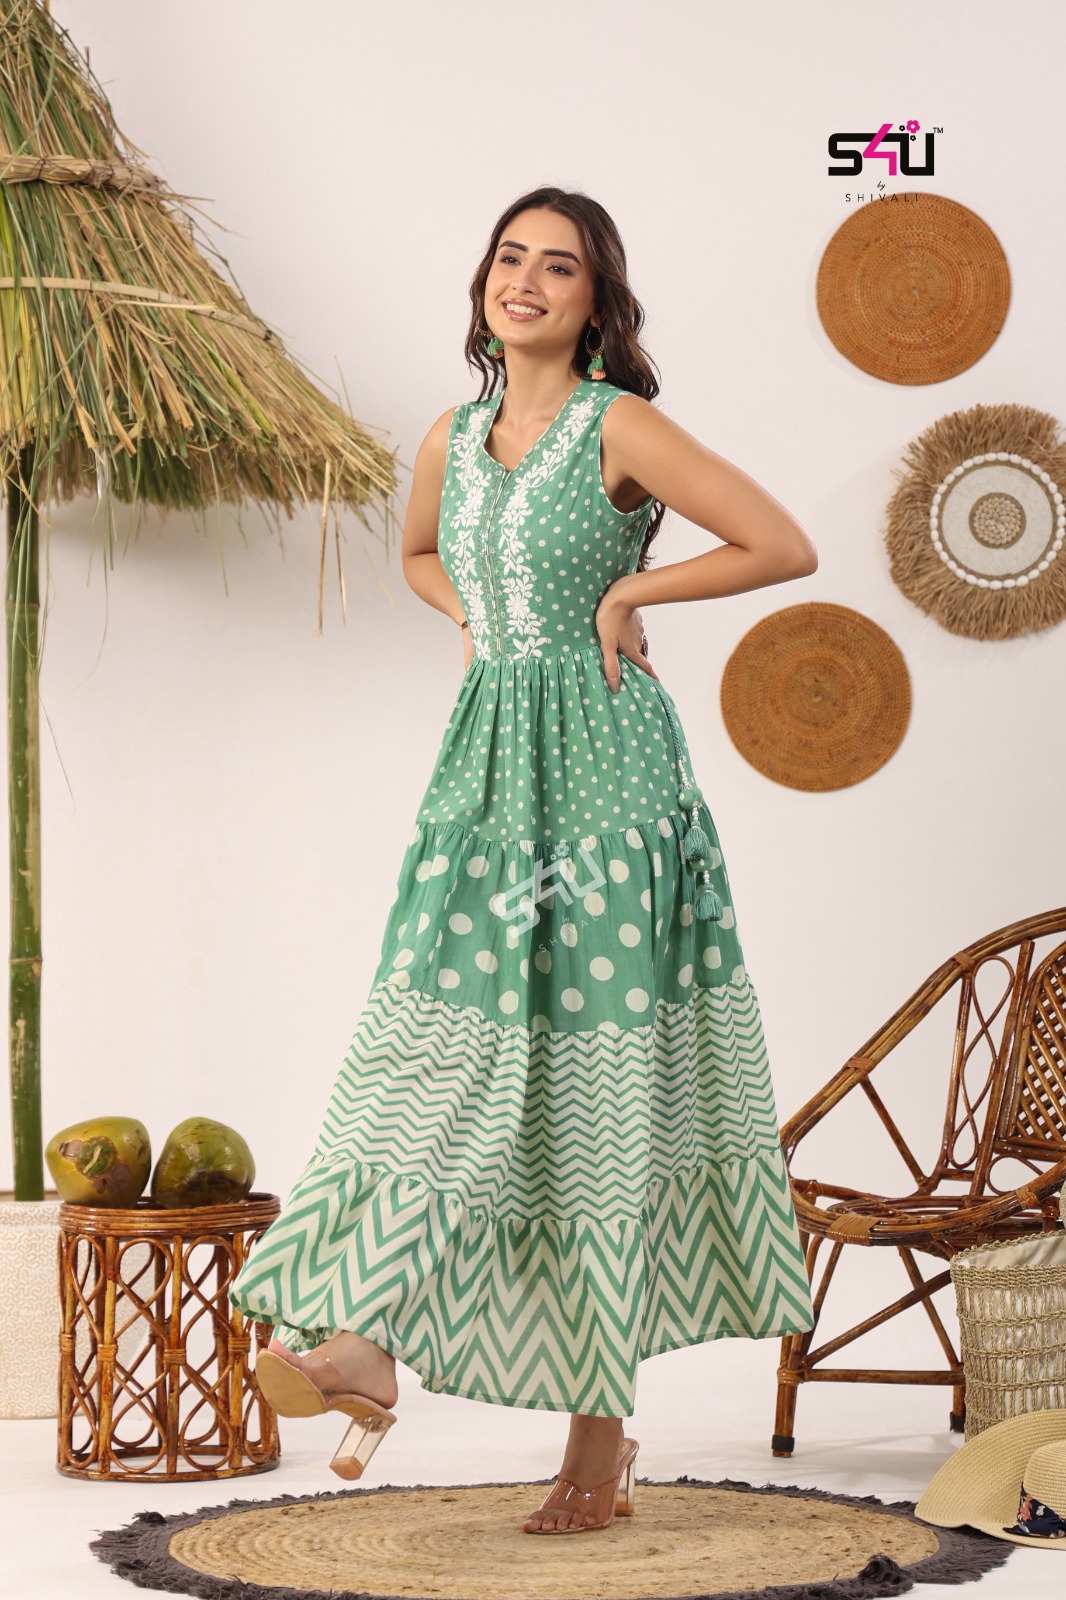 s4U Kurtis Flairy Tales vol 9 Gowns Catalog collection 6